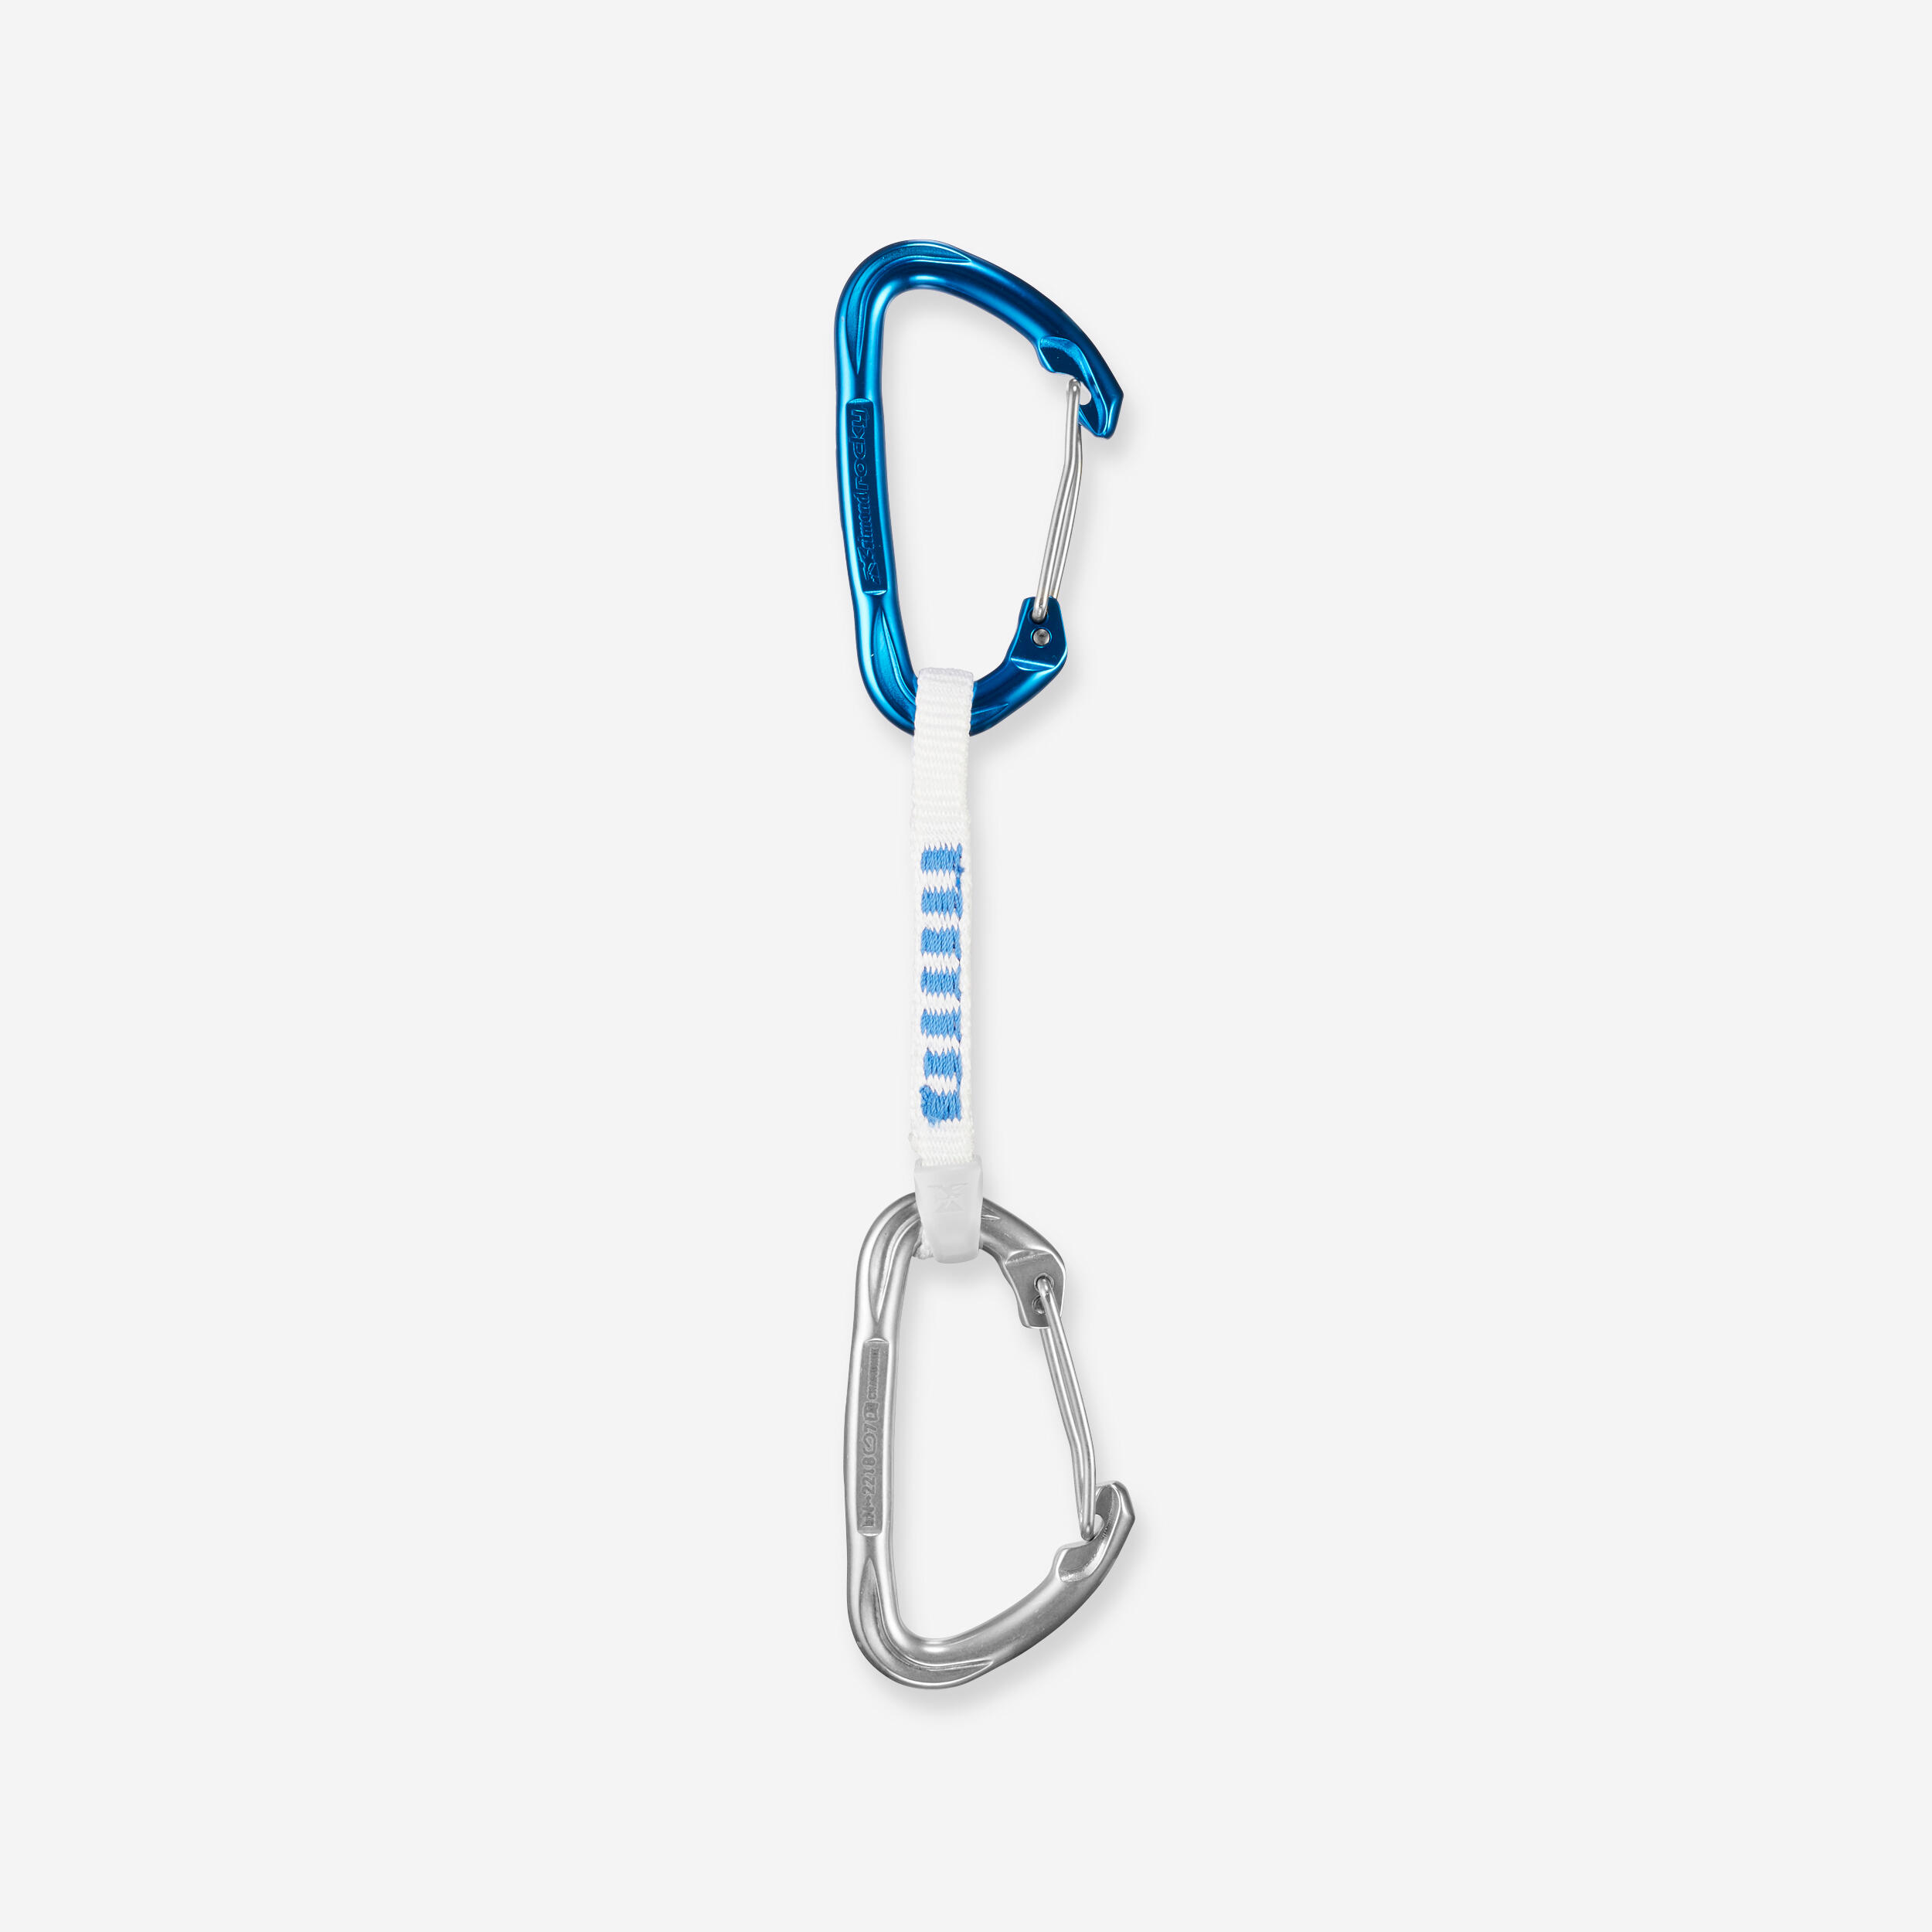 Climbing and Mountaineering Lightweight Quickdraw - Alpinism 11 cm 1/6